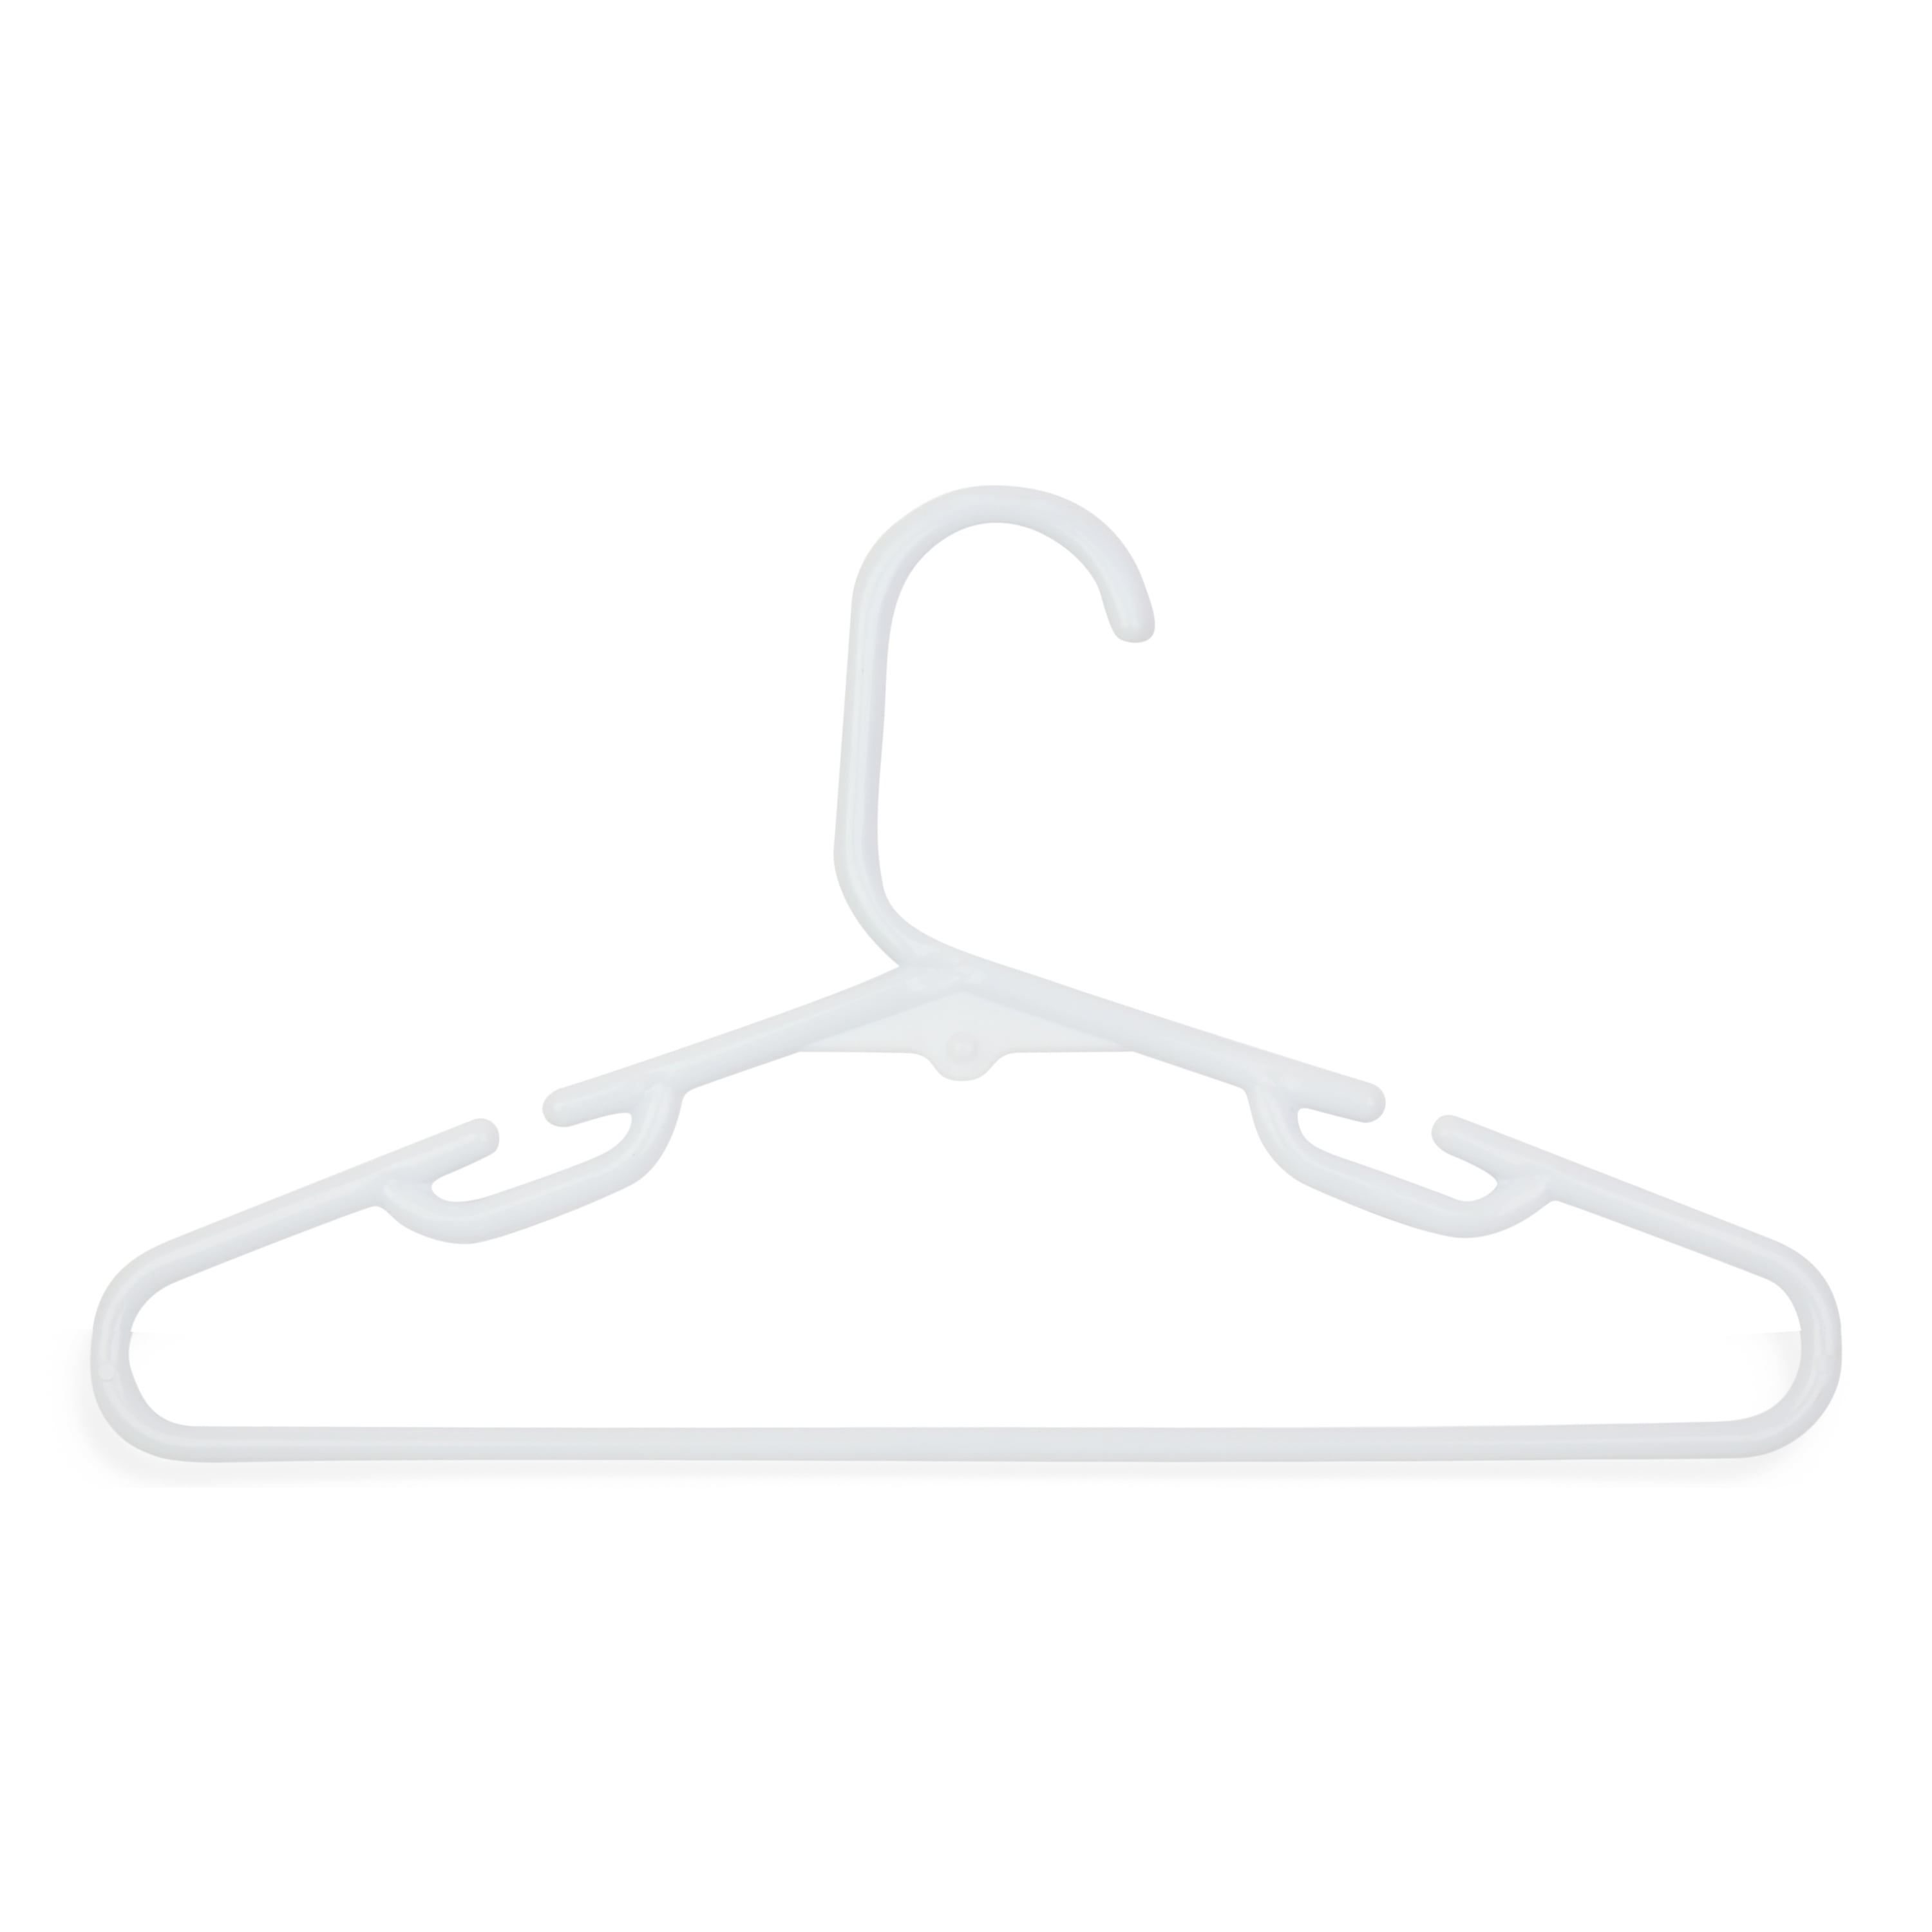 ZenStyle 100 Pack Standard Size White Plastic Hangers for Clothes  Lightweight Space Saving Tubular Clothing Hangers (White)